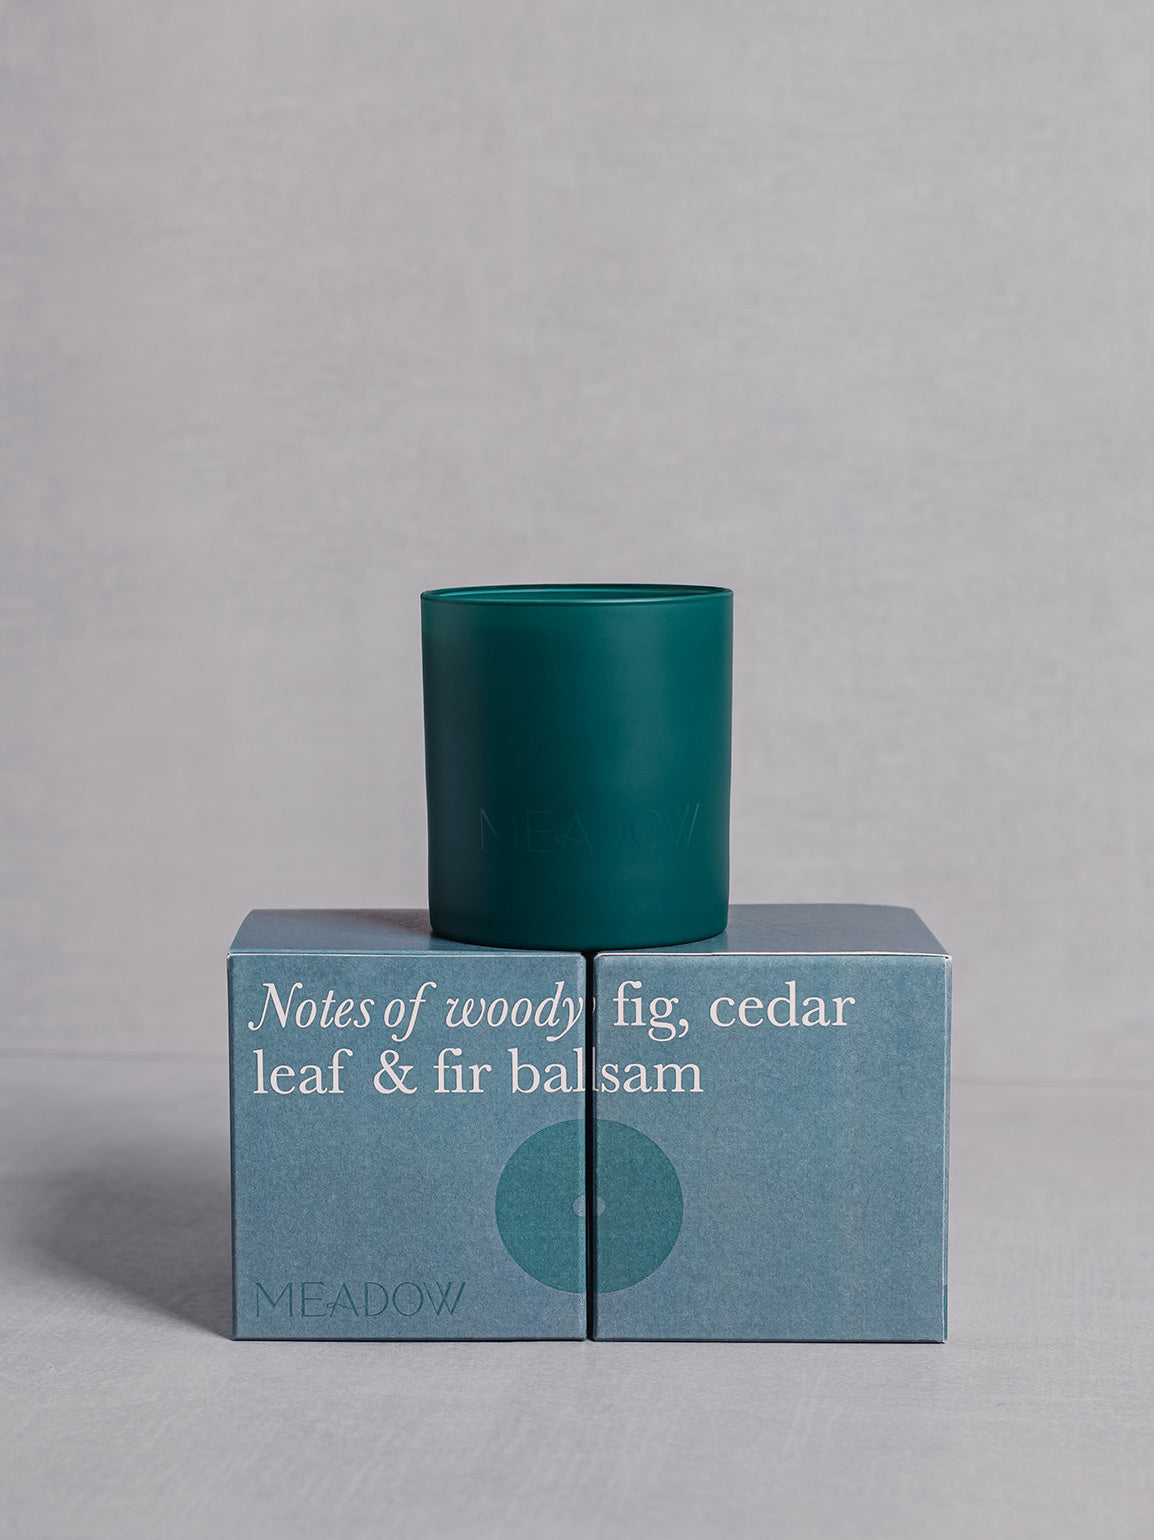 Notes of Woody - Meadow - Candles, Home & Stationery, Notes of Woody